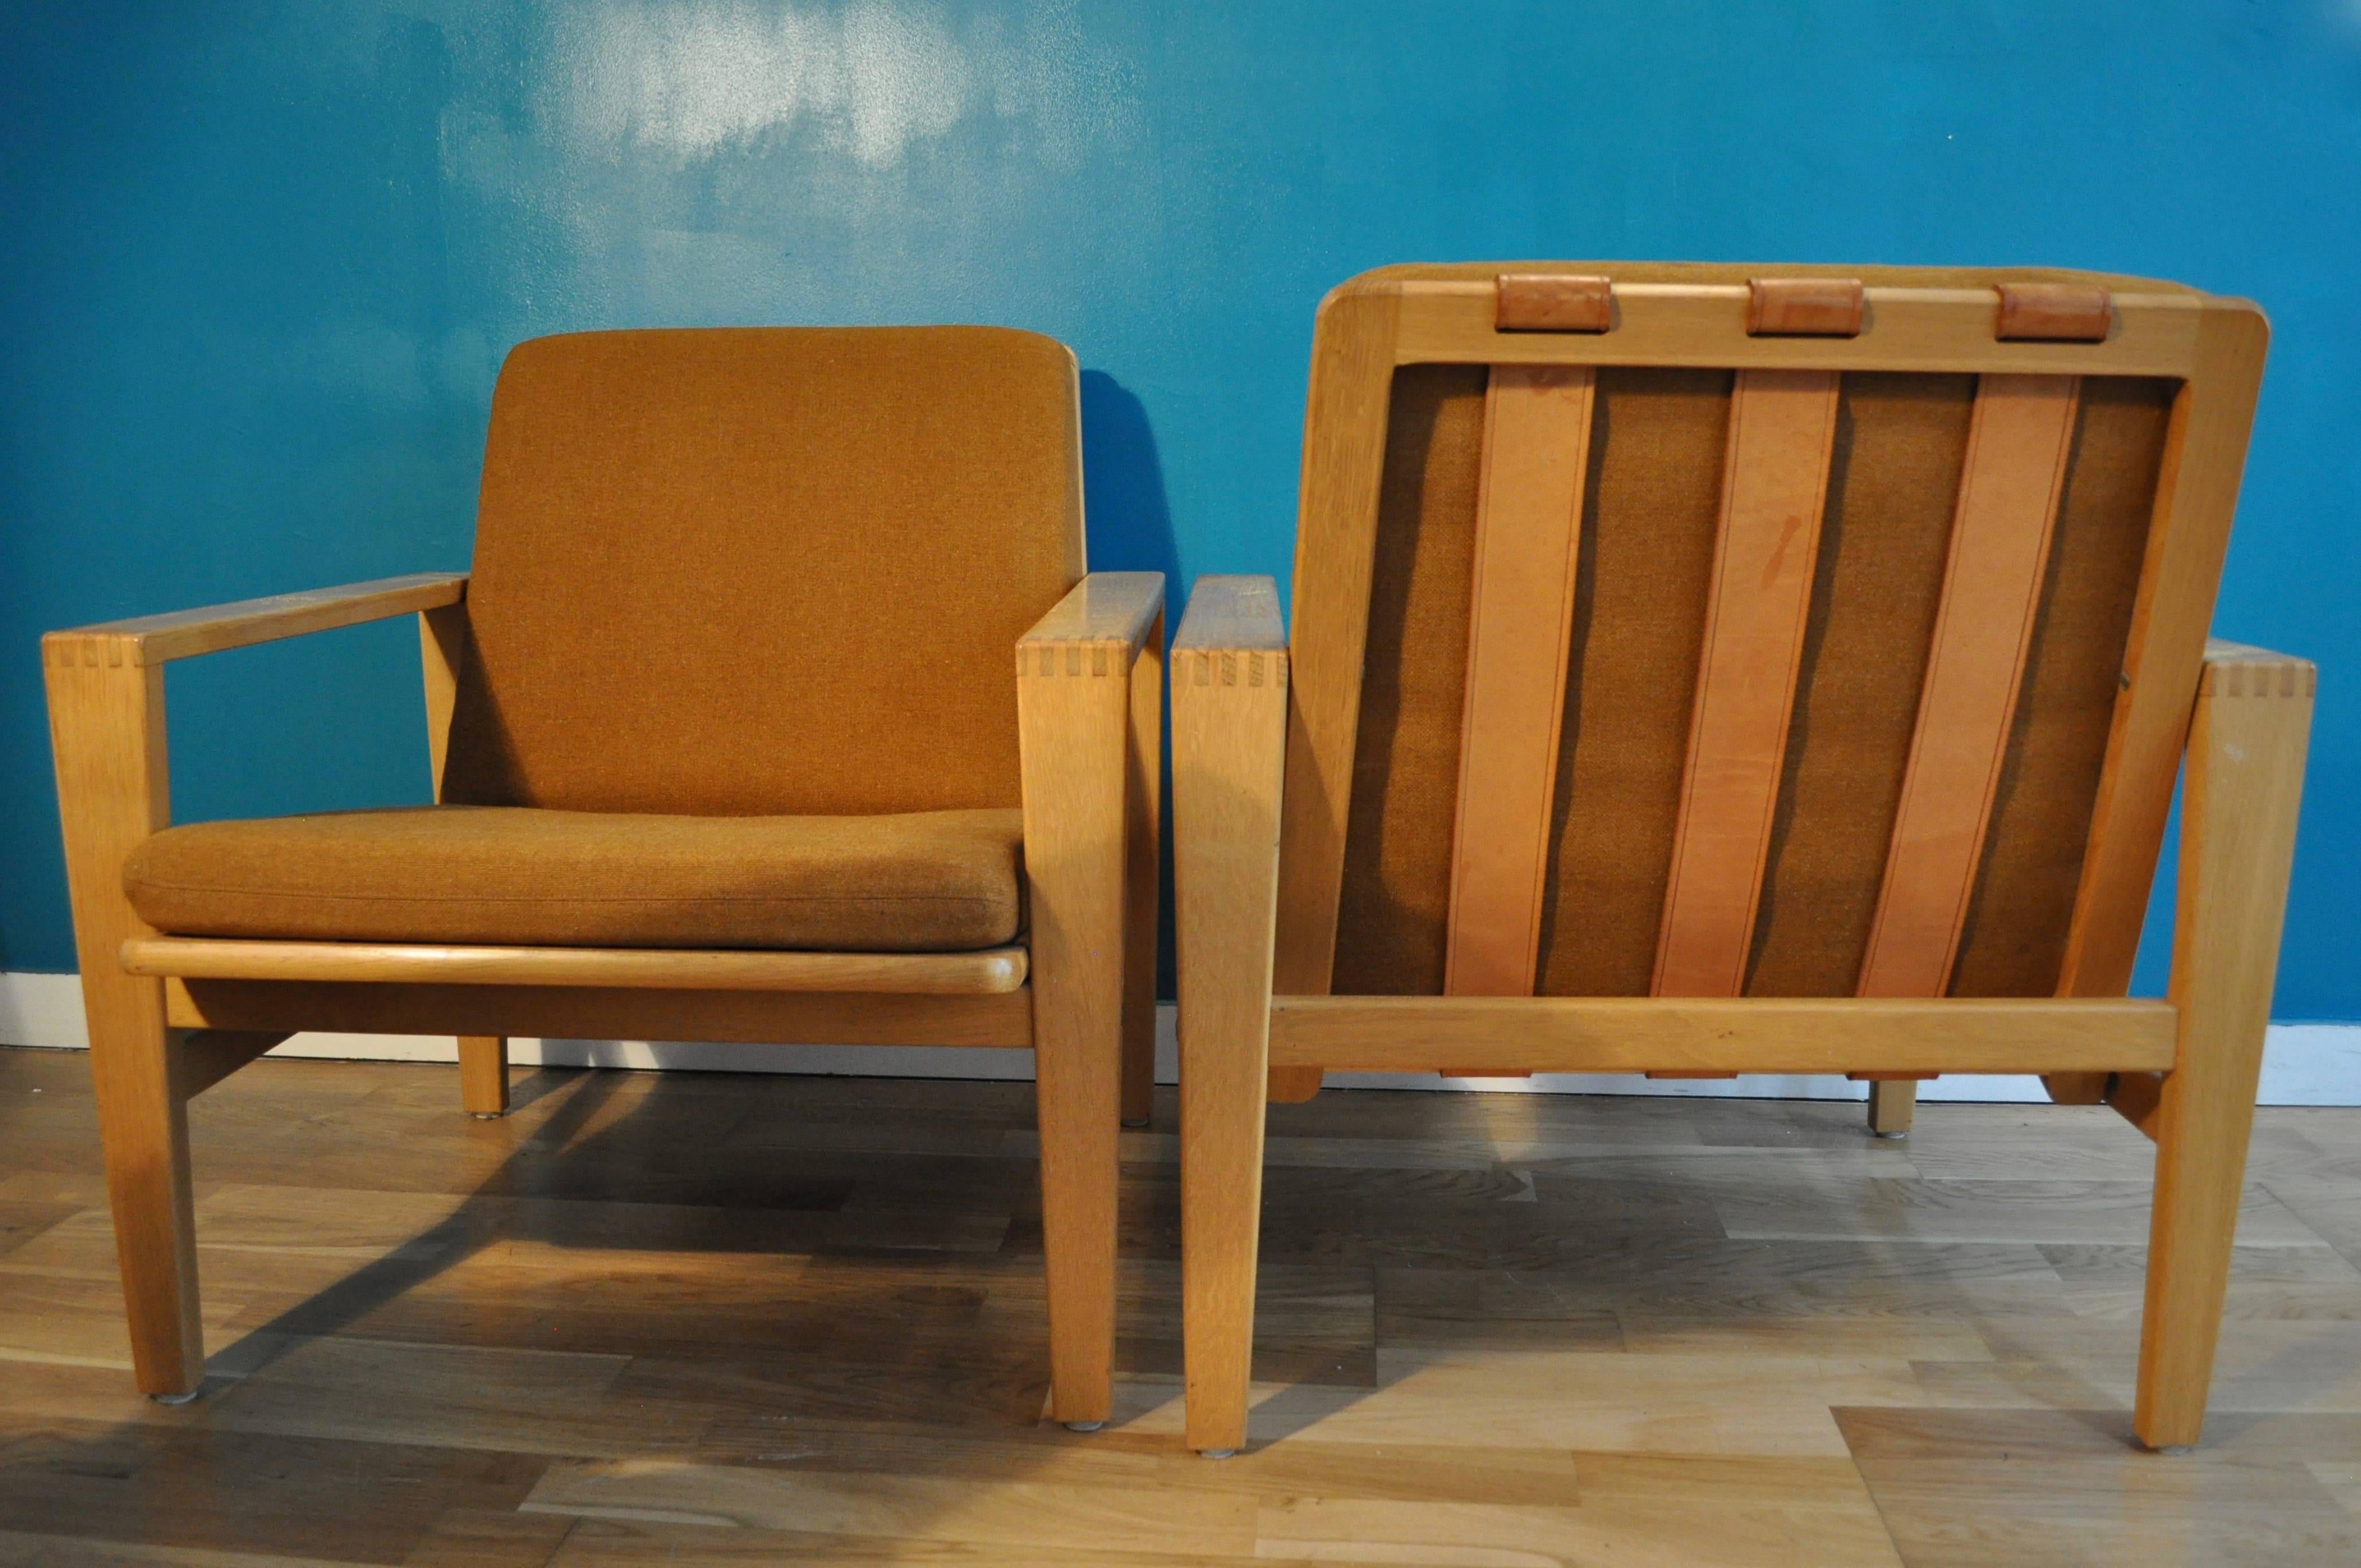 Impressive pair of armchair made in oak and leather structure designed by the swedish designer Eric Merthen, circa 1960. The fabric is in its orginal condition and can be replaced.

Can be ship disassembled for cheapest solution.